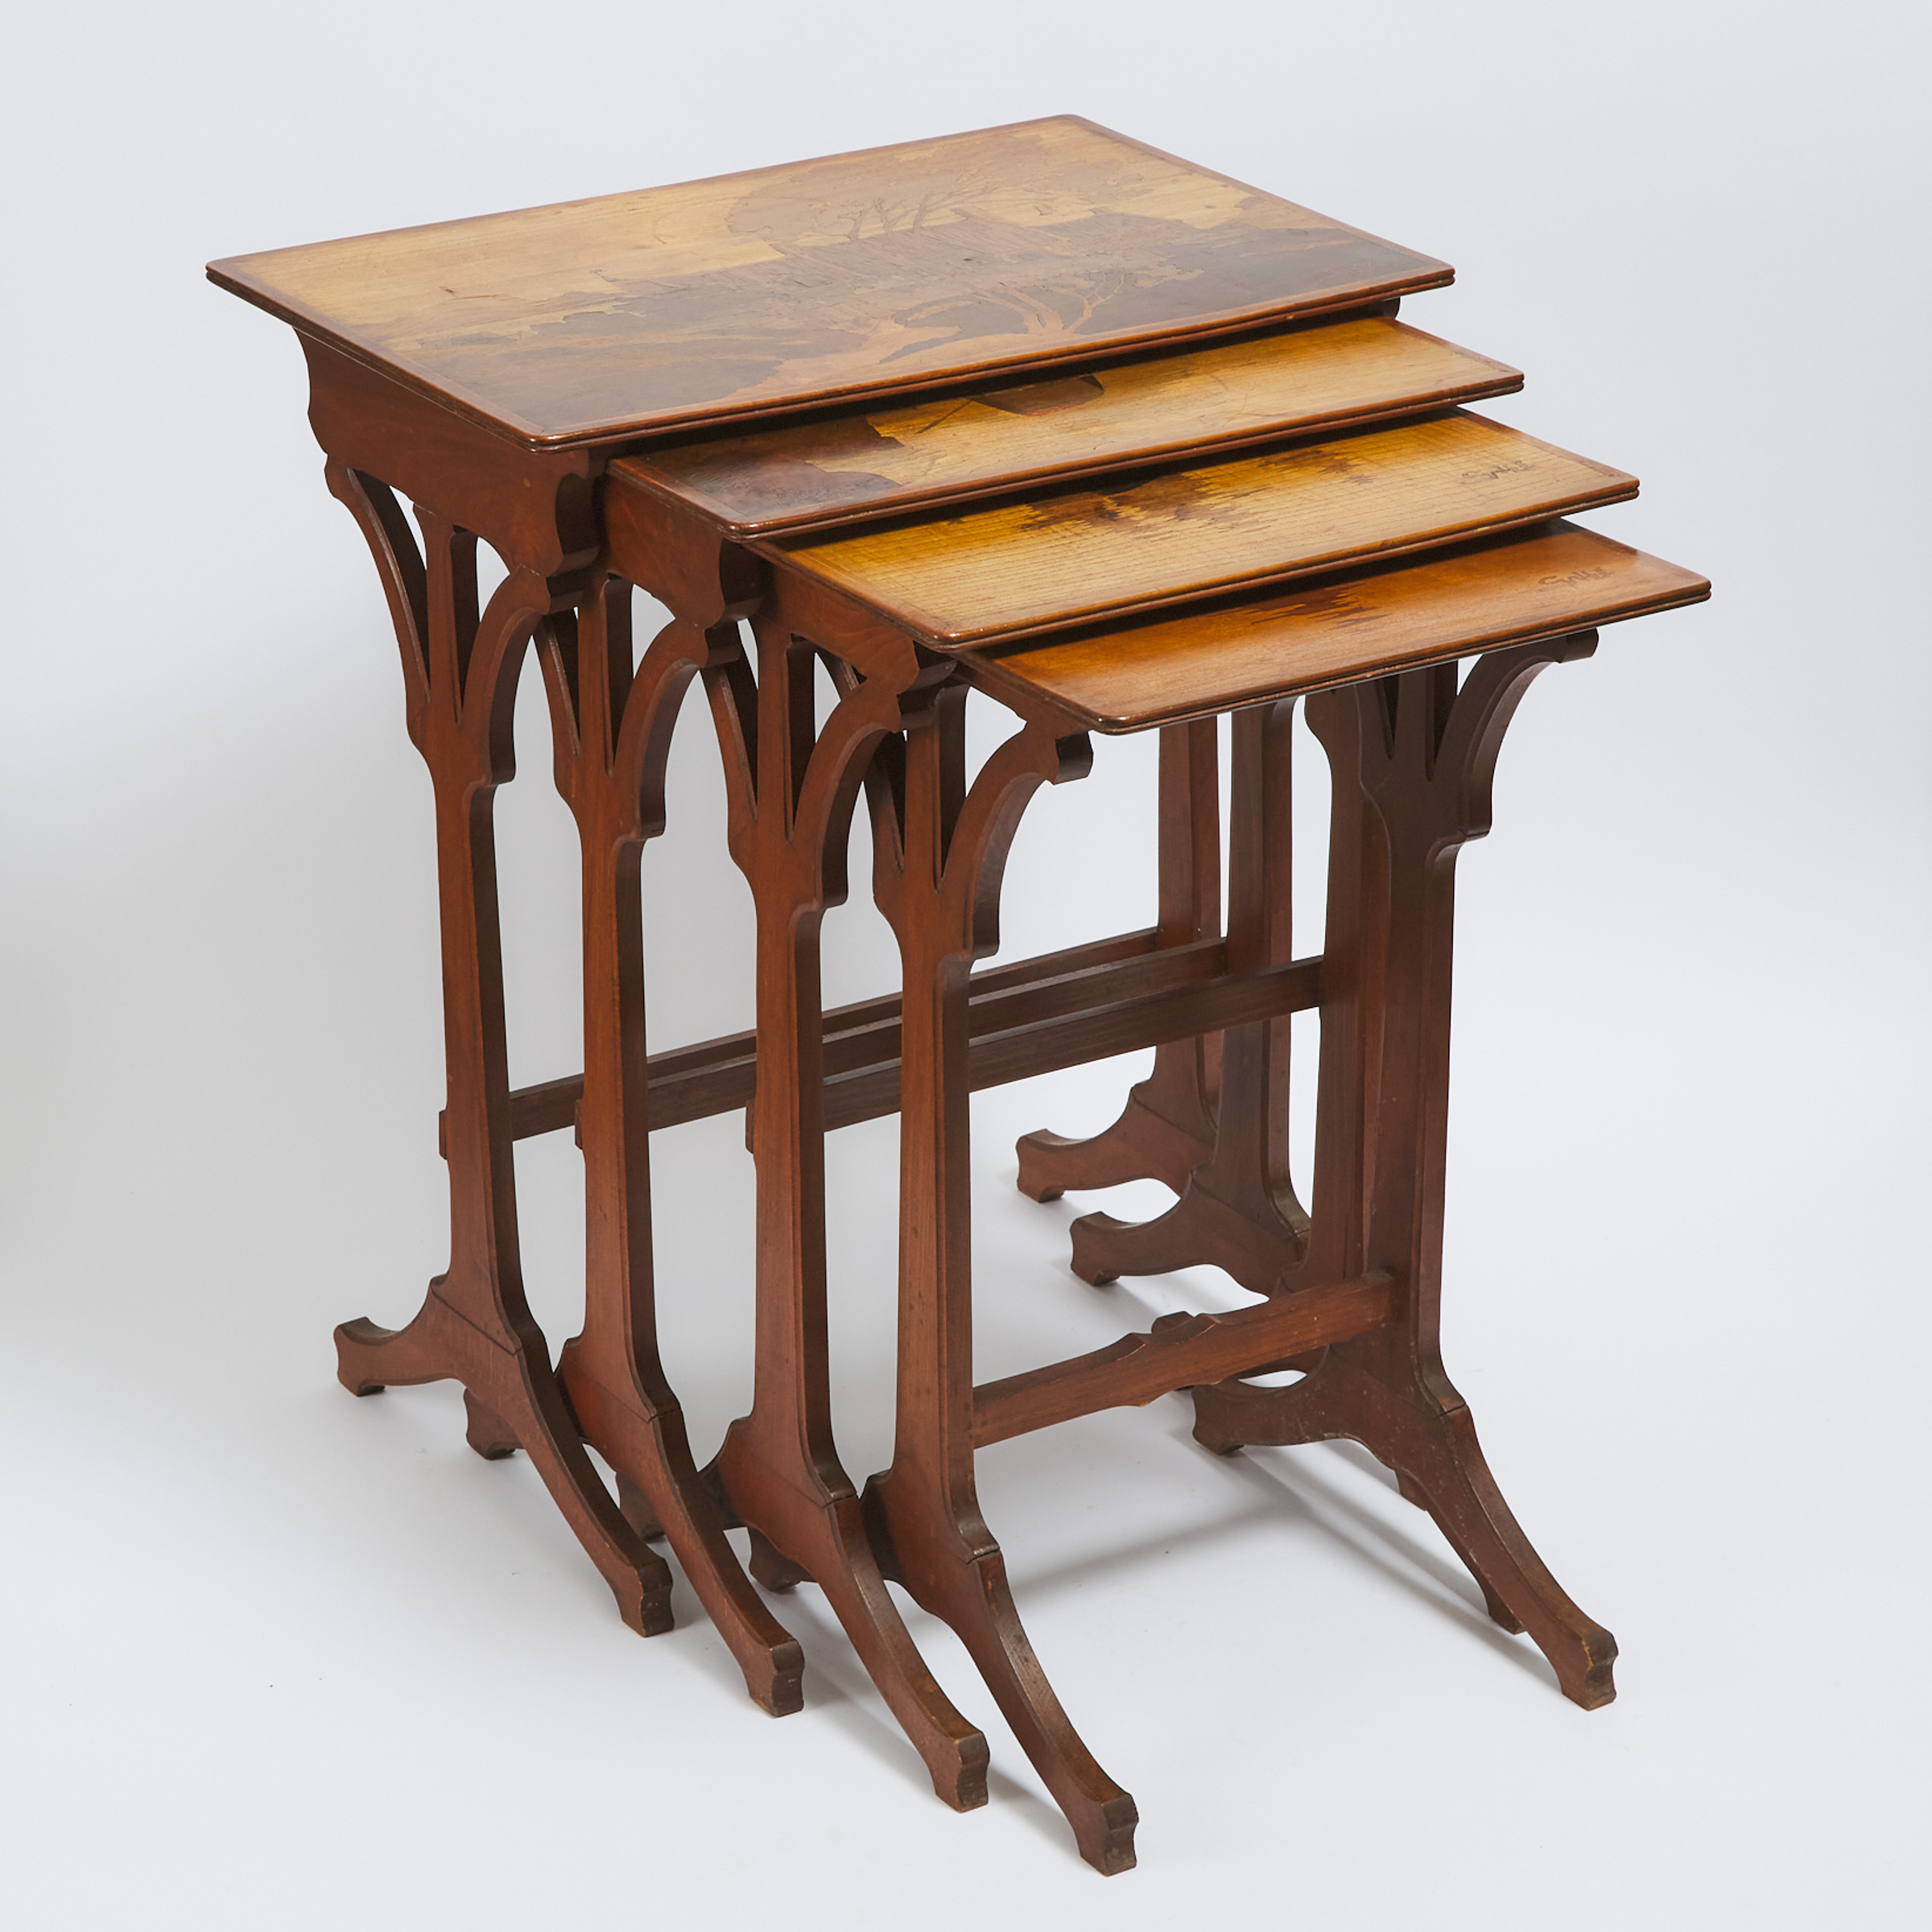 Set of Four Gallé Mixed Wood Inlaid Nesting Tables, early 20th century